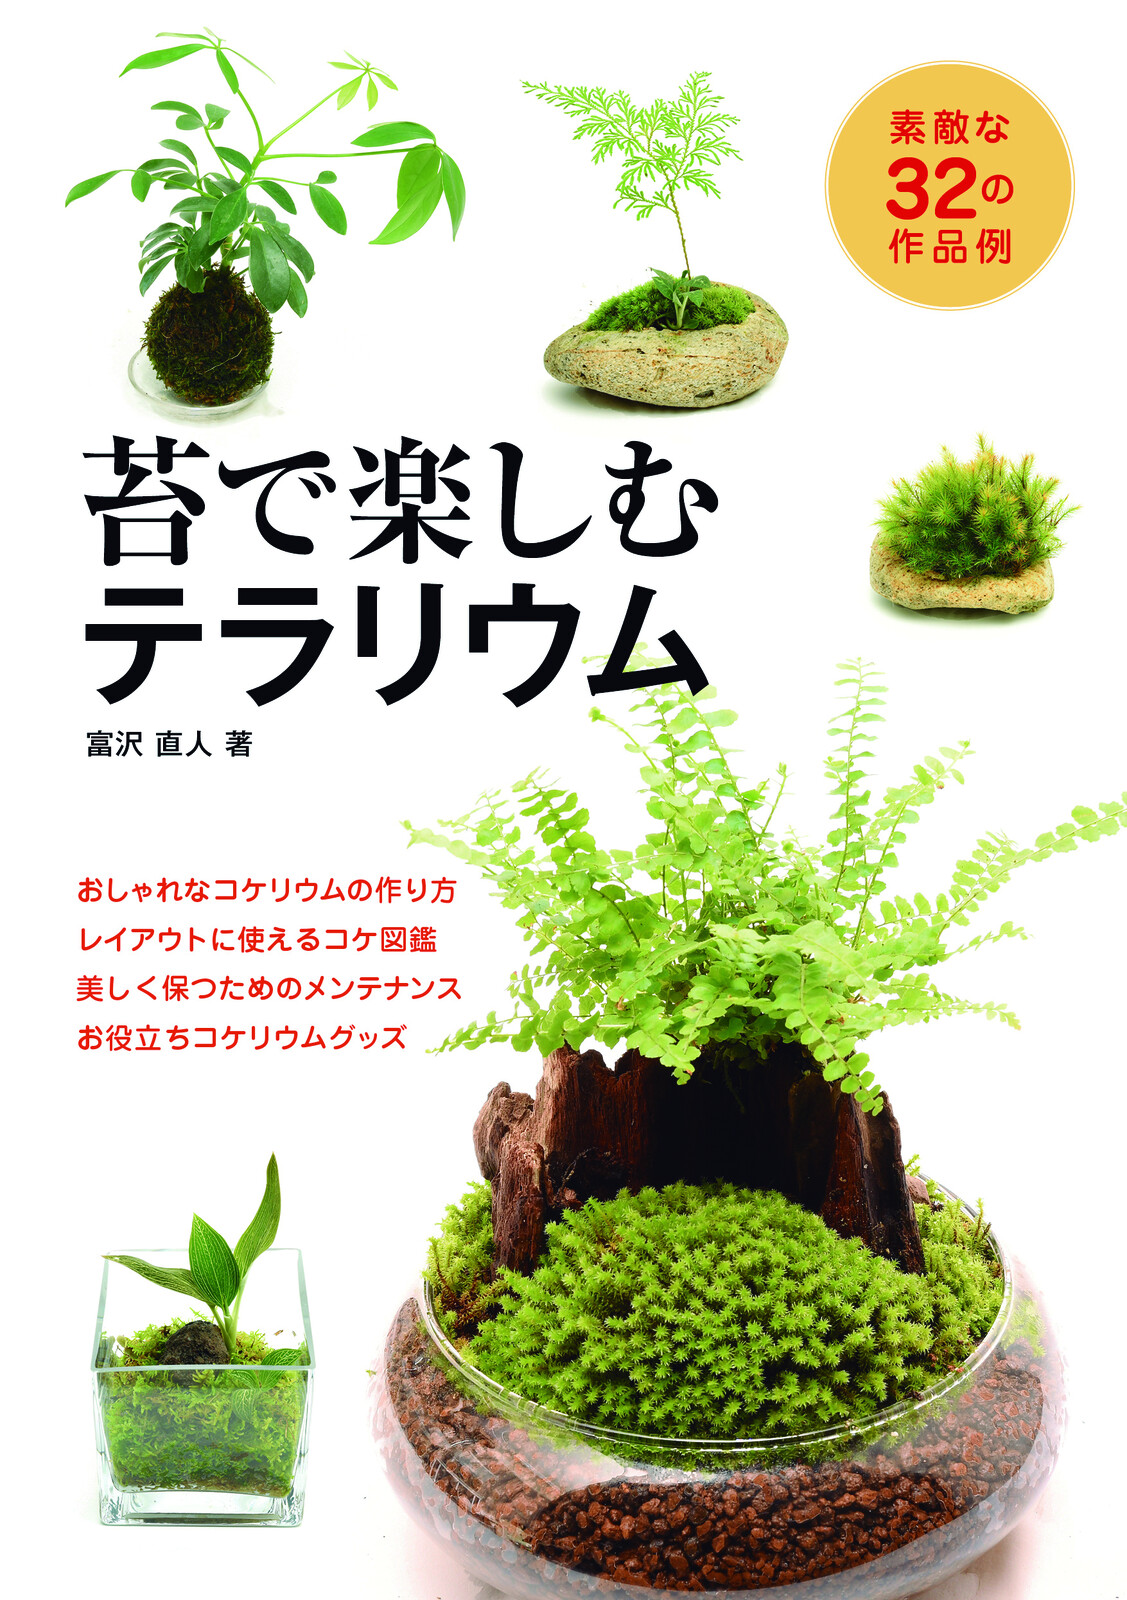 Terrarium To Enjoy With Moss Import Japanese Products At Wholesale Prices Super Delivery